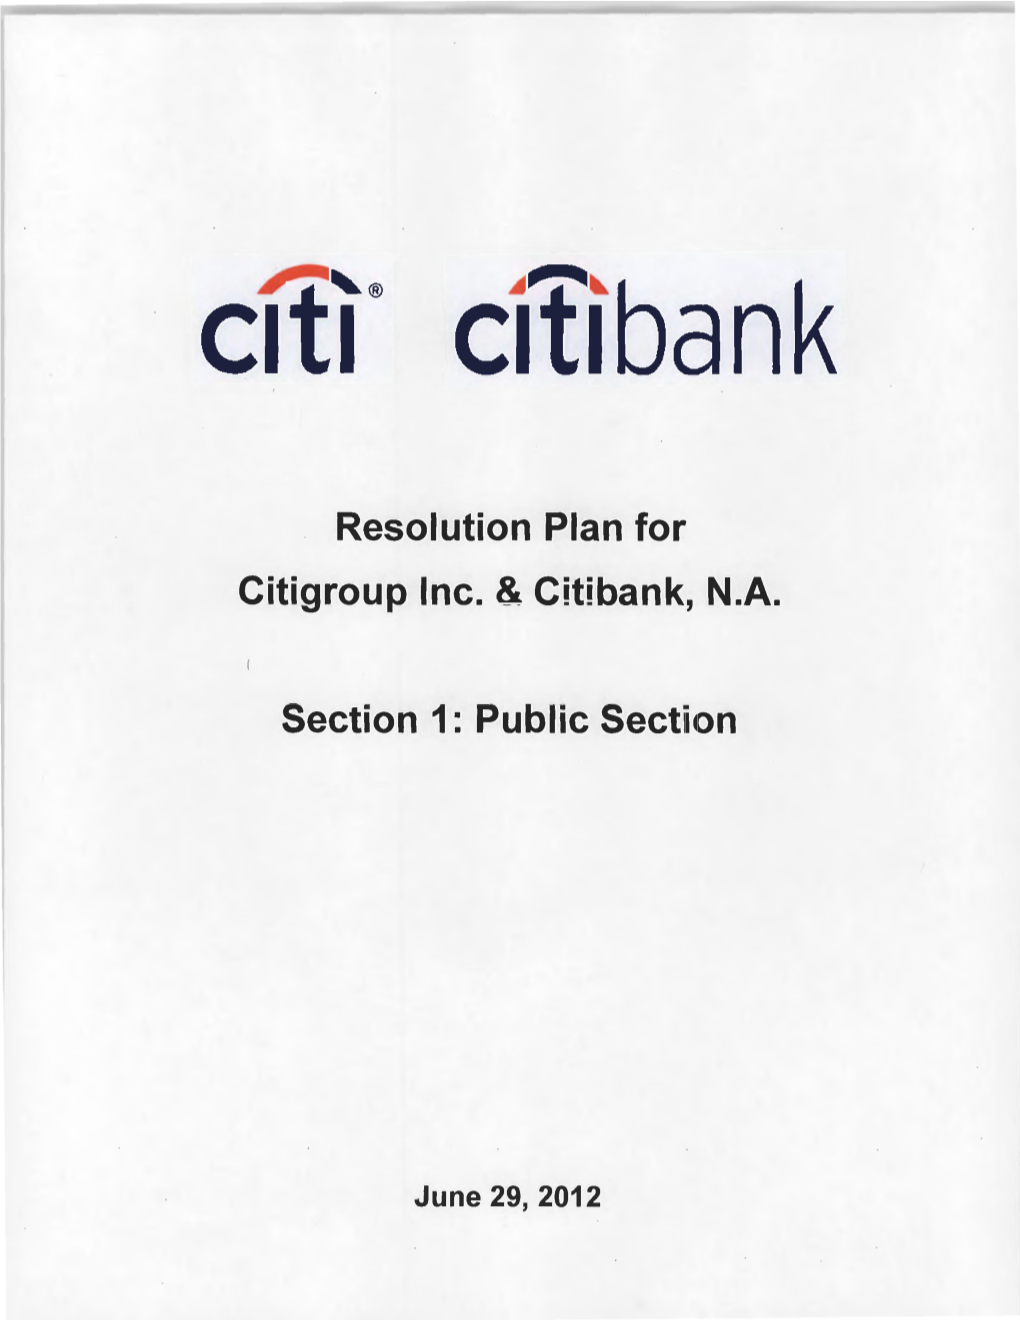 Resolution Plan for Citigroup Inc. & Citibank, N.A